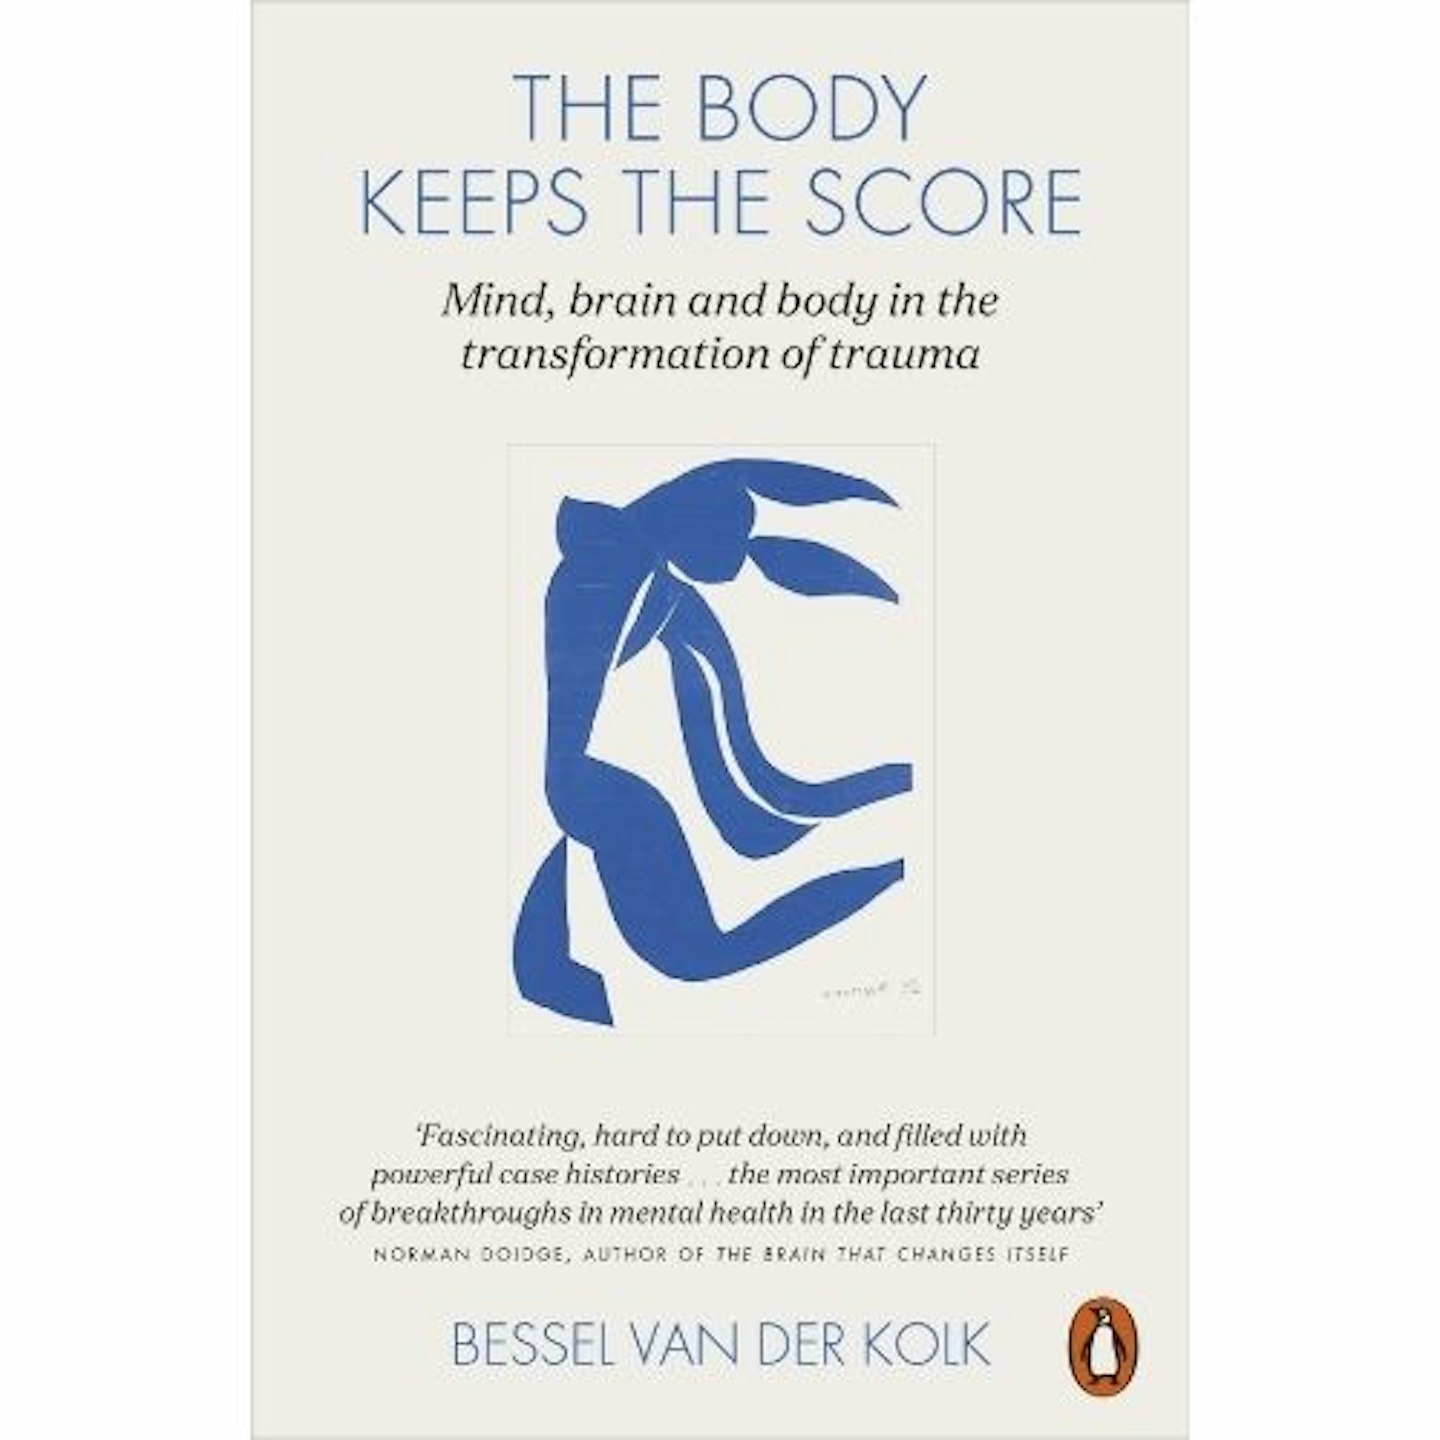 best wellbeing books - The Body Keeps the Score: Mind, Brain and Body in the Transformation of Trauma by Bessel van der Kolk